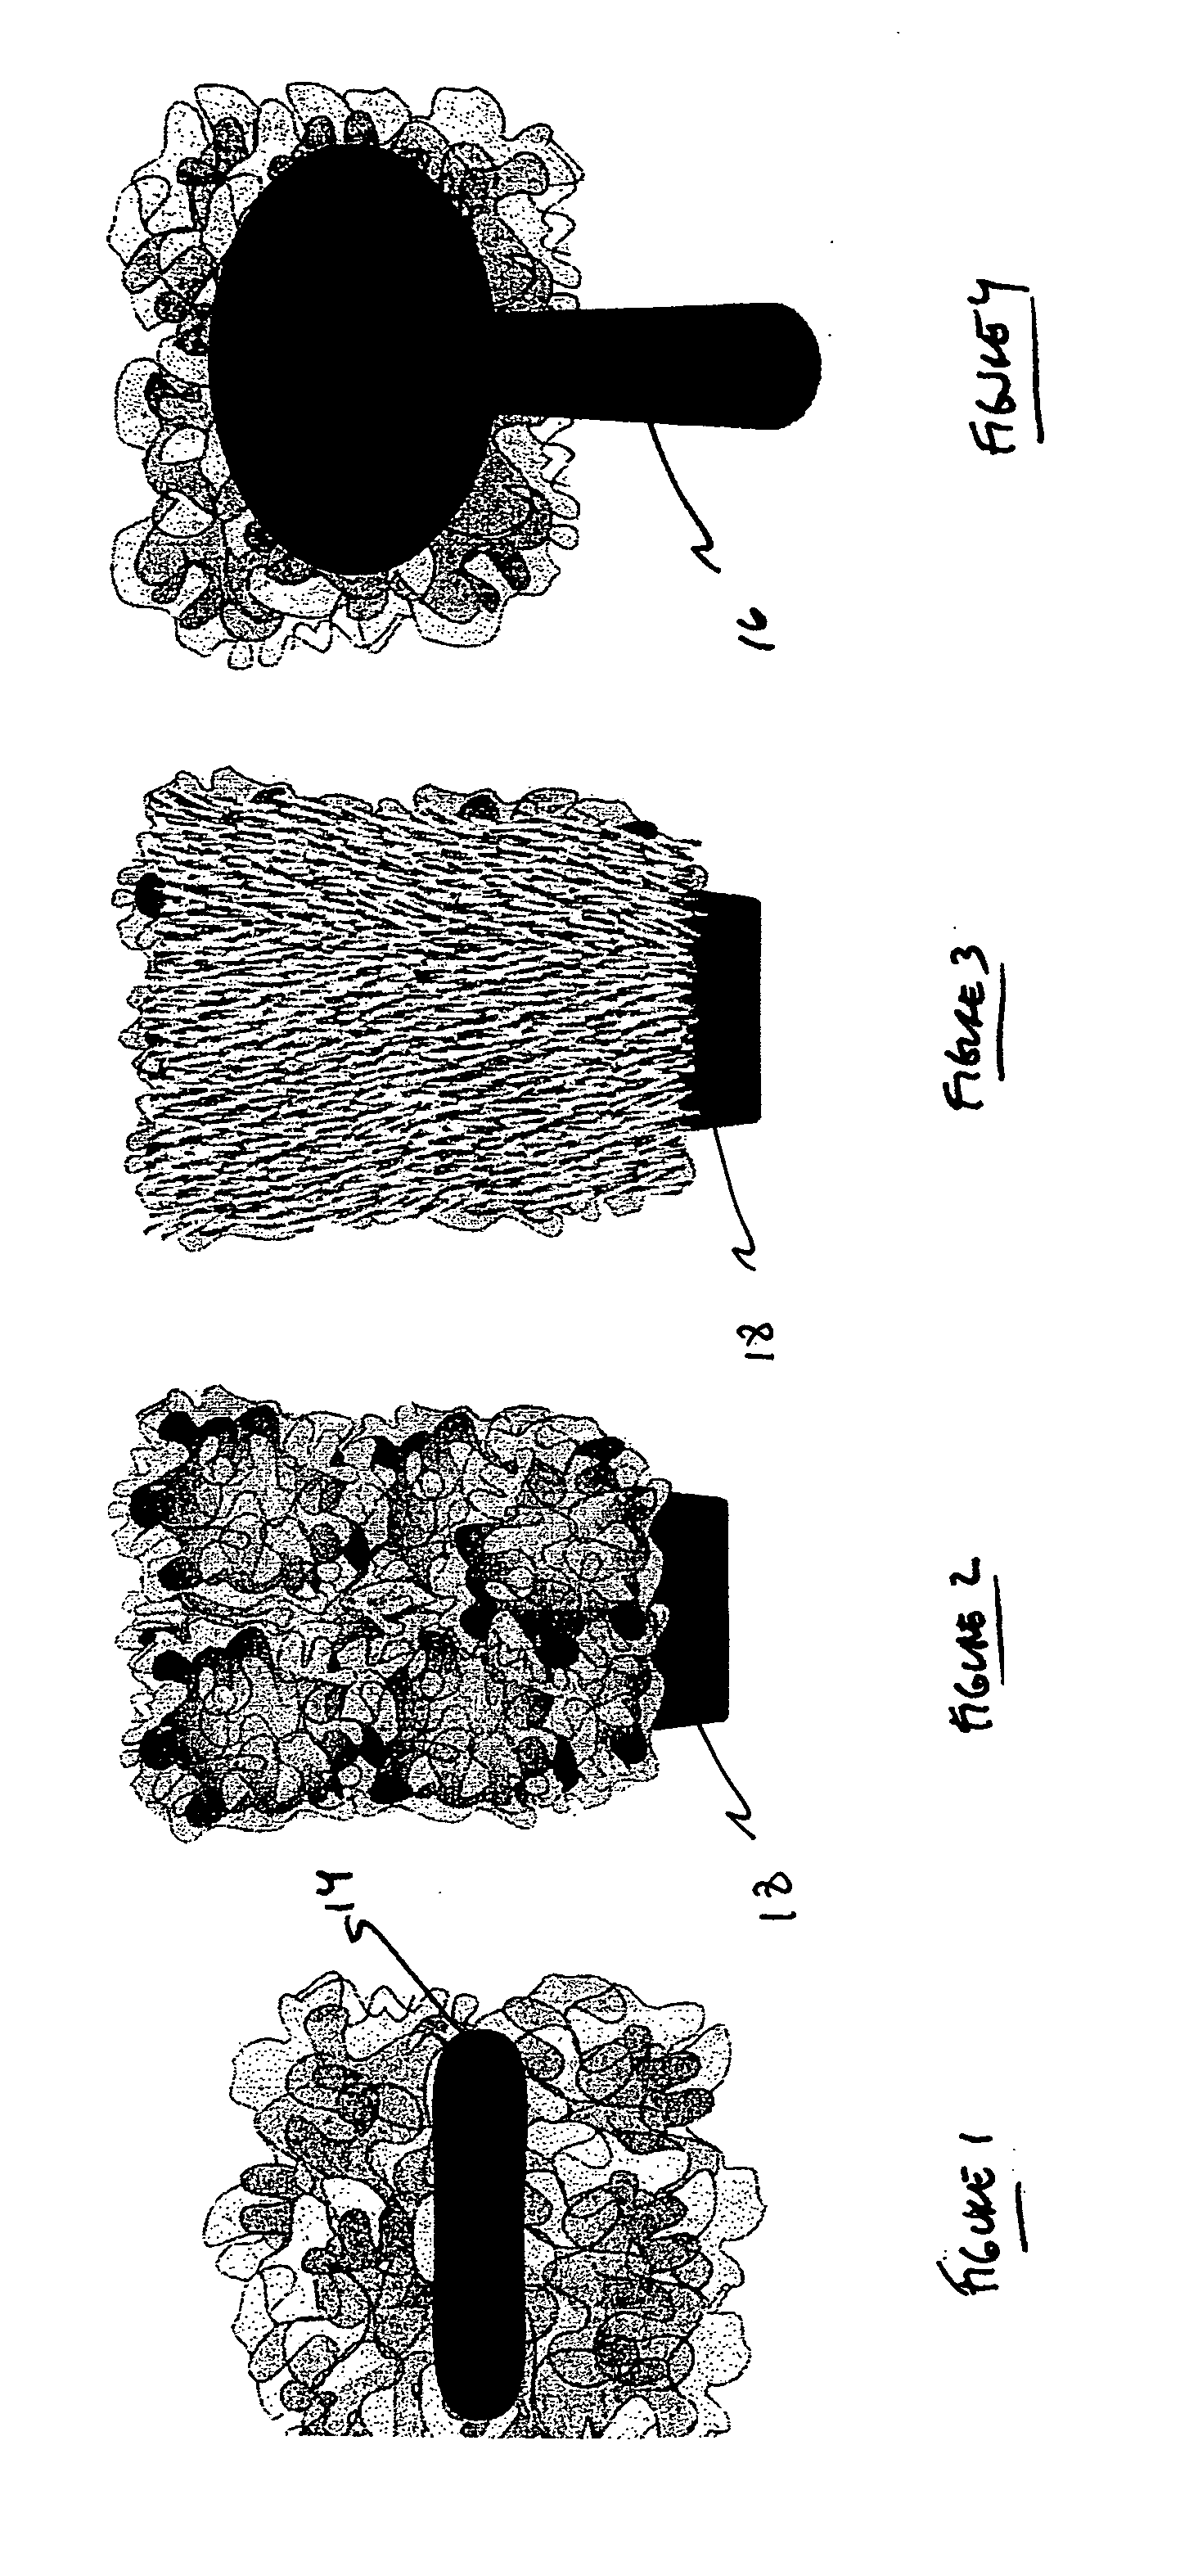 Method for manufacture of improved cleaning and washing products